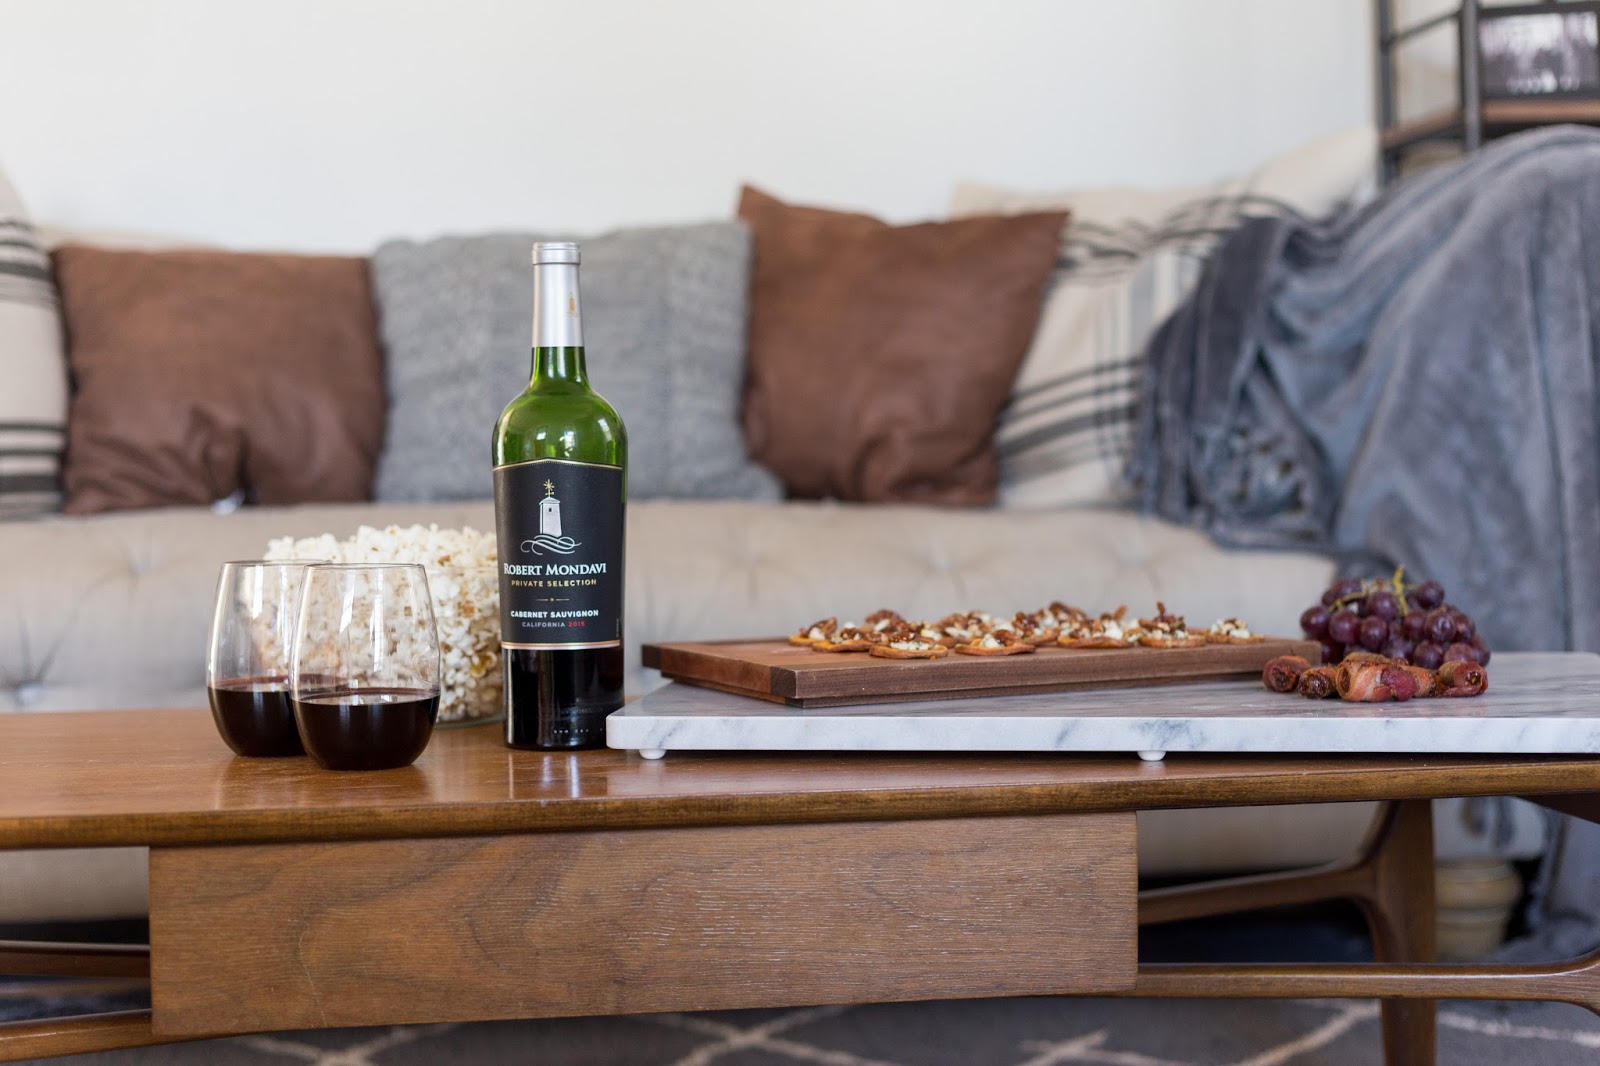 Sharing deets for the perfect girl's night with Robert Mondavi Private Selection